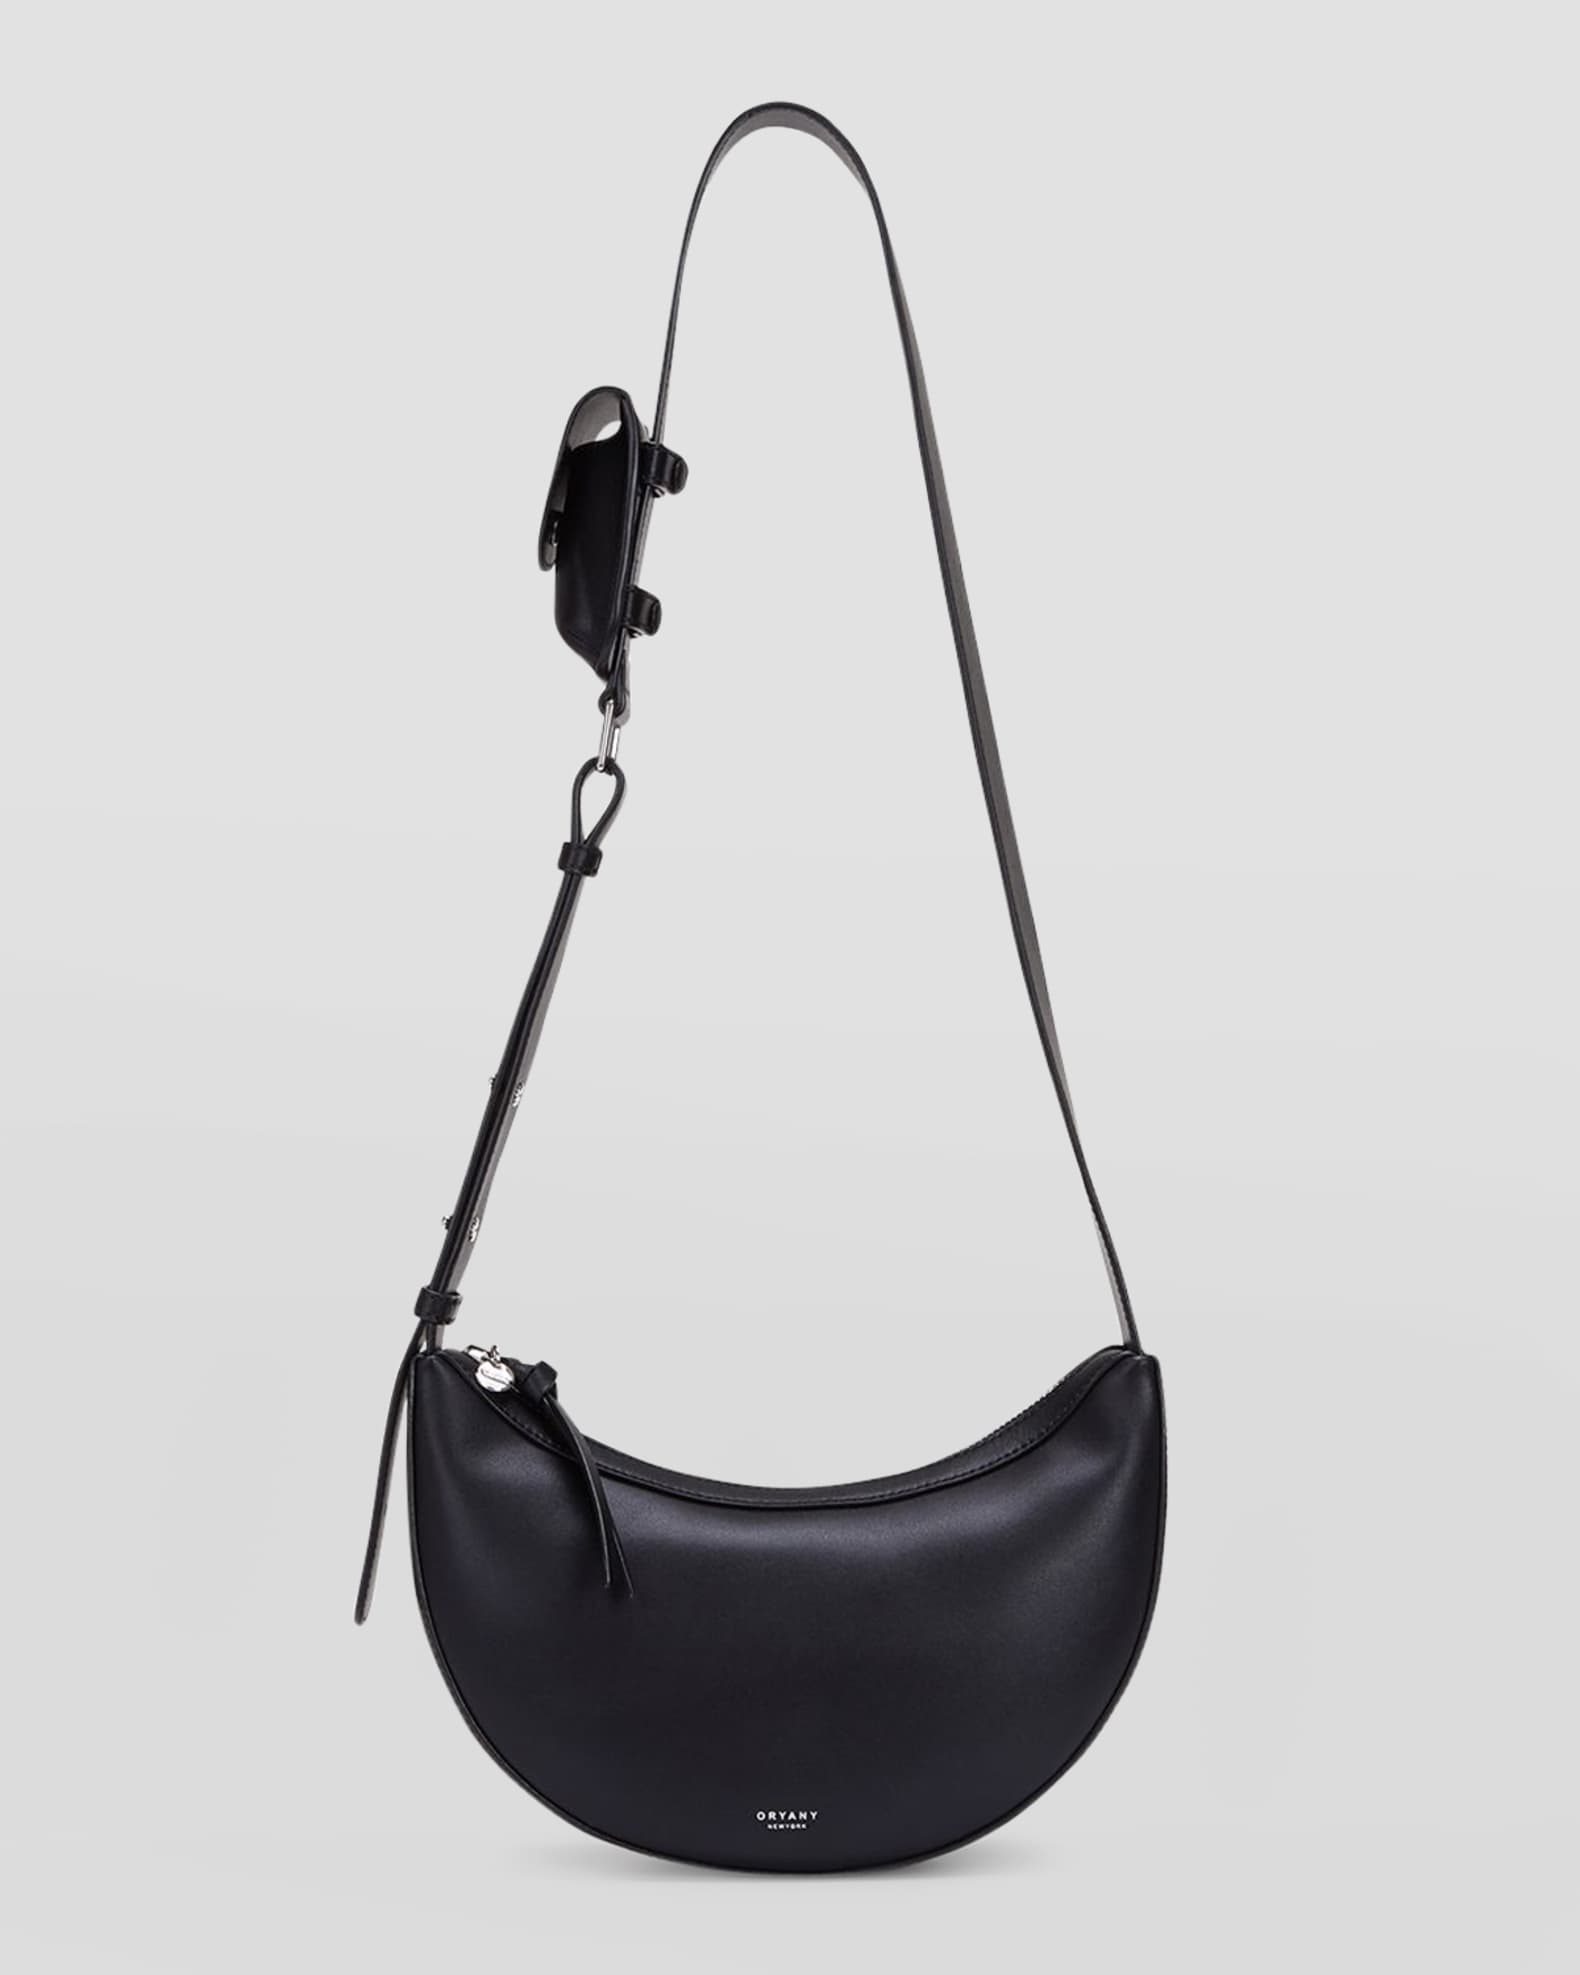 Half Moon Convertible Crossbody and Belt Bag in Saddle Eco-suede